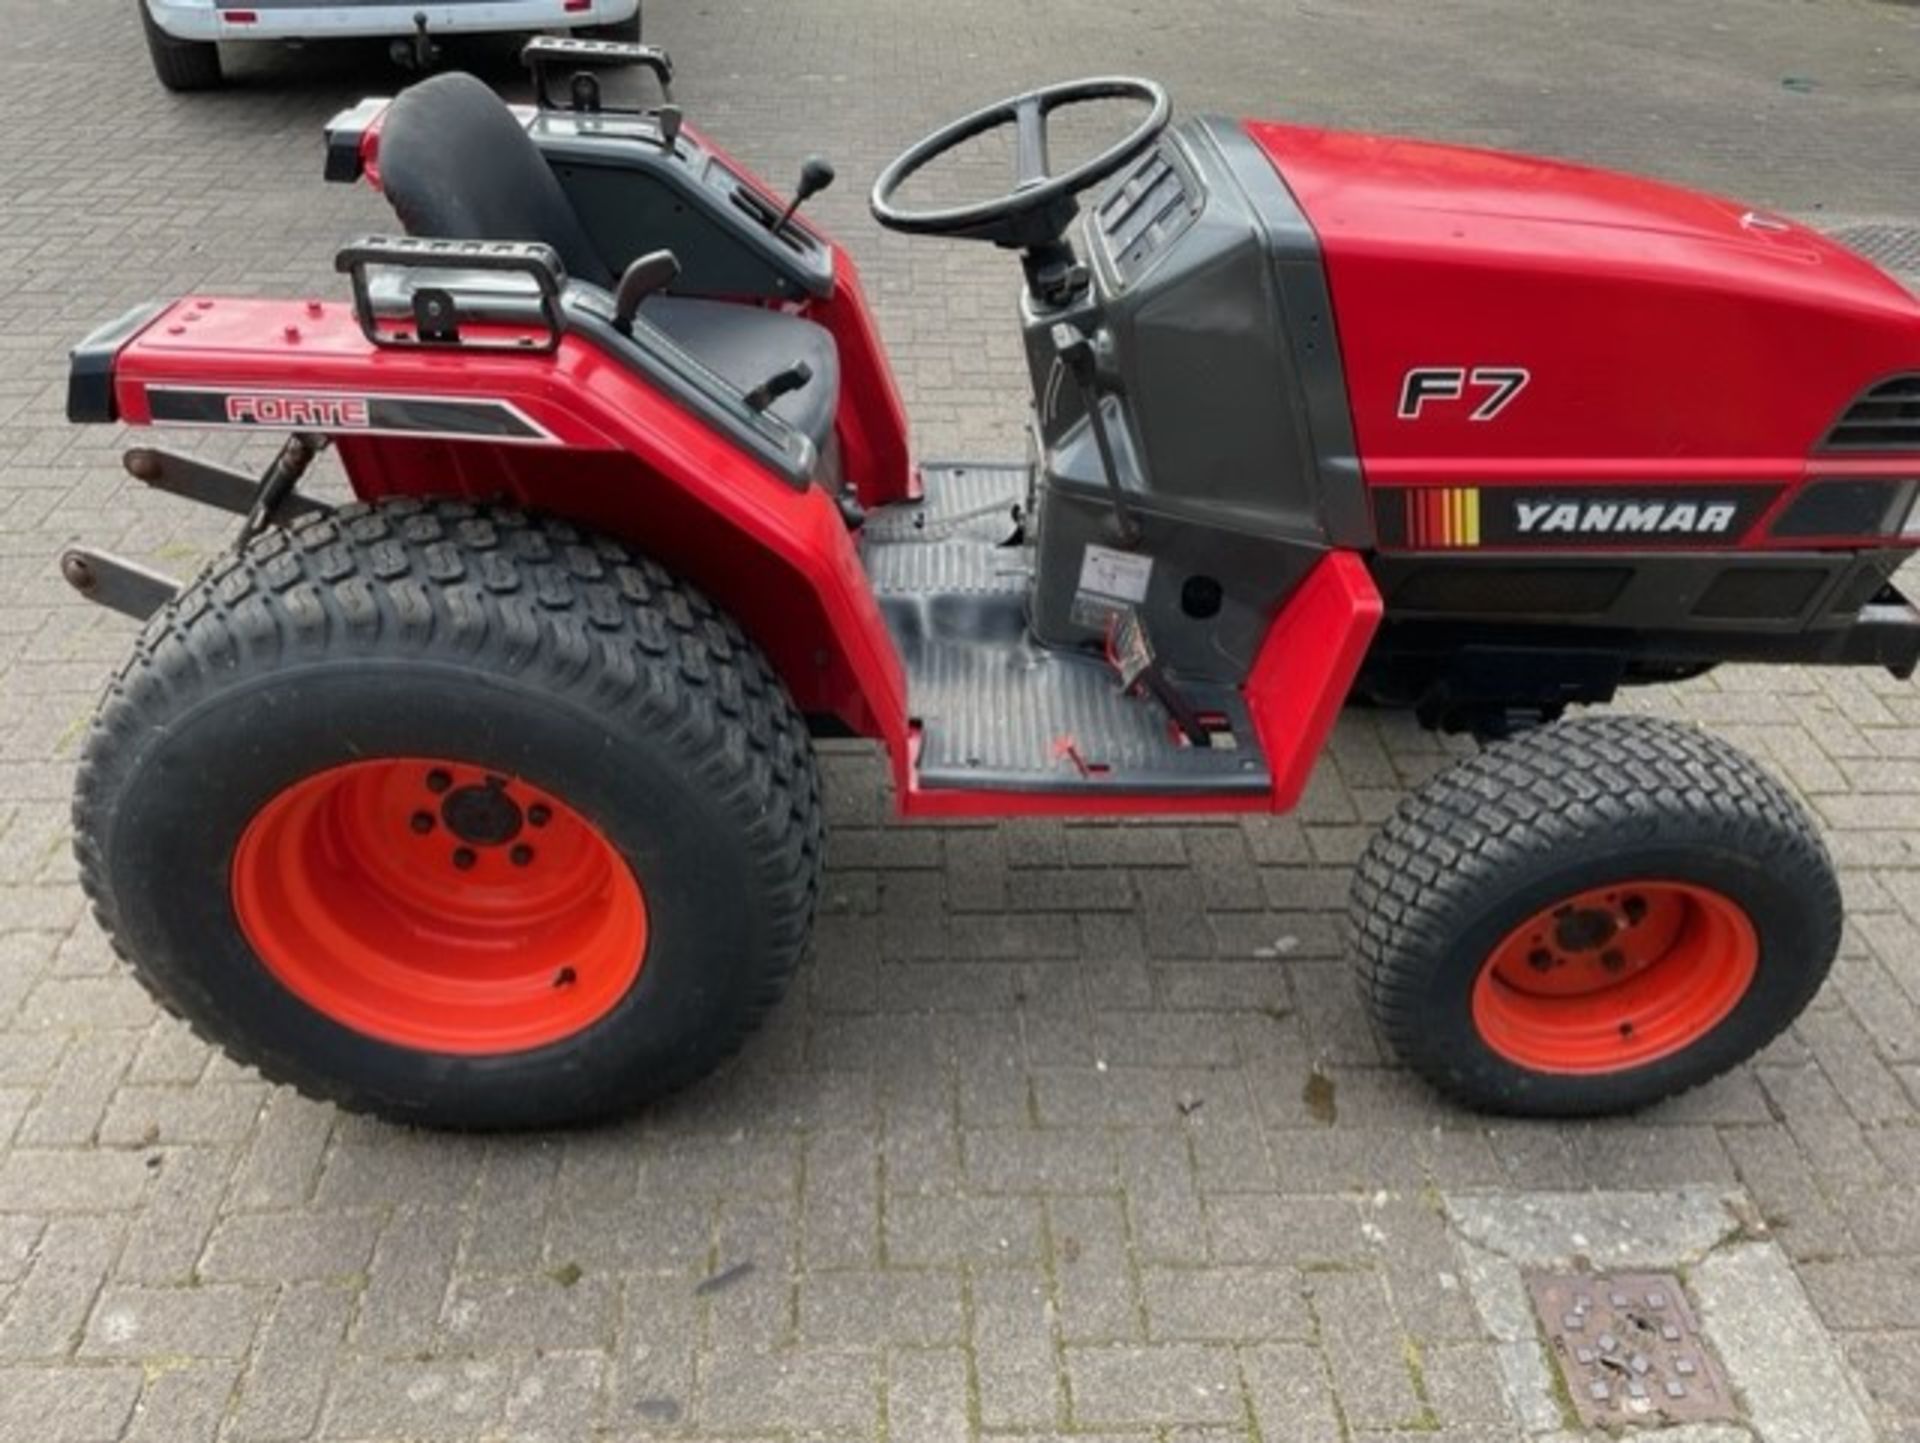 yanmar 22 horse tractor 1200 hours in full working order video can be sent to serious bidders - Image 4 of 7